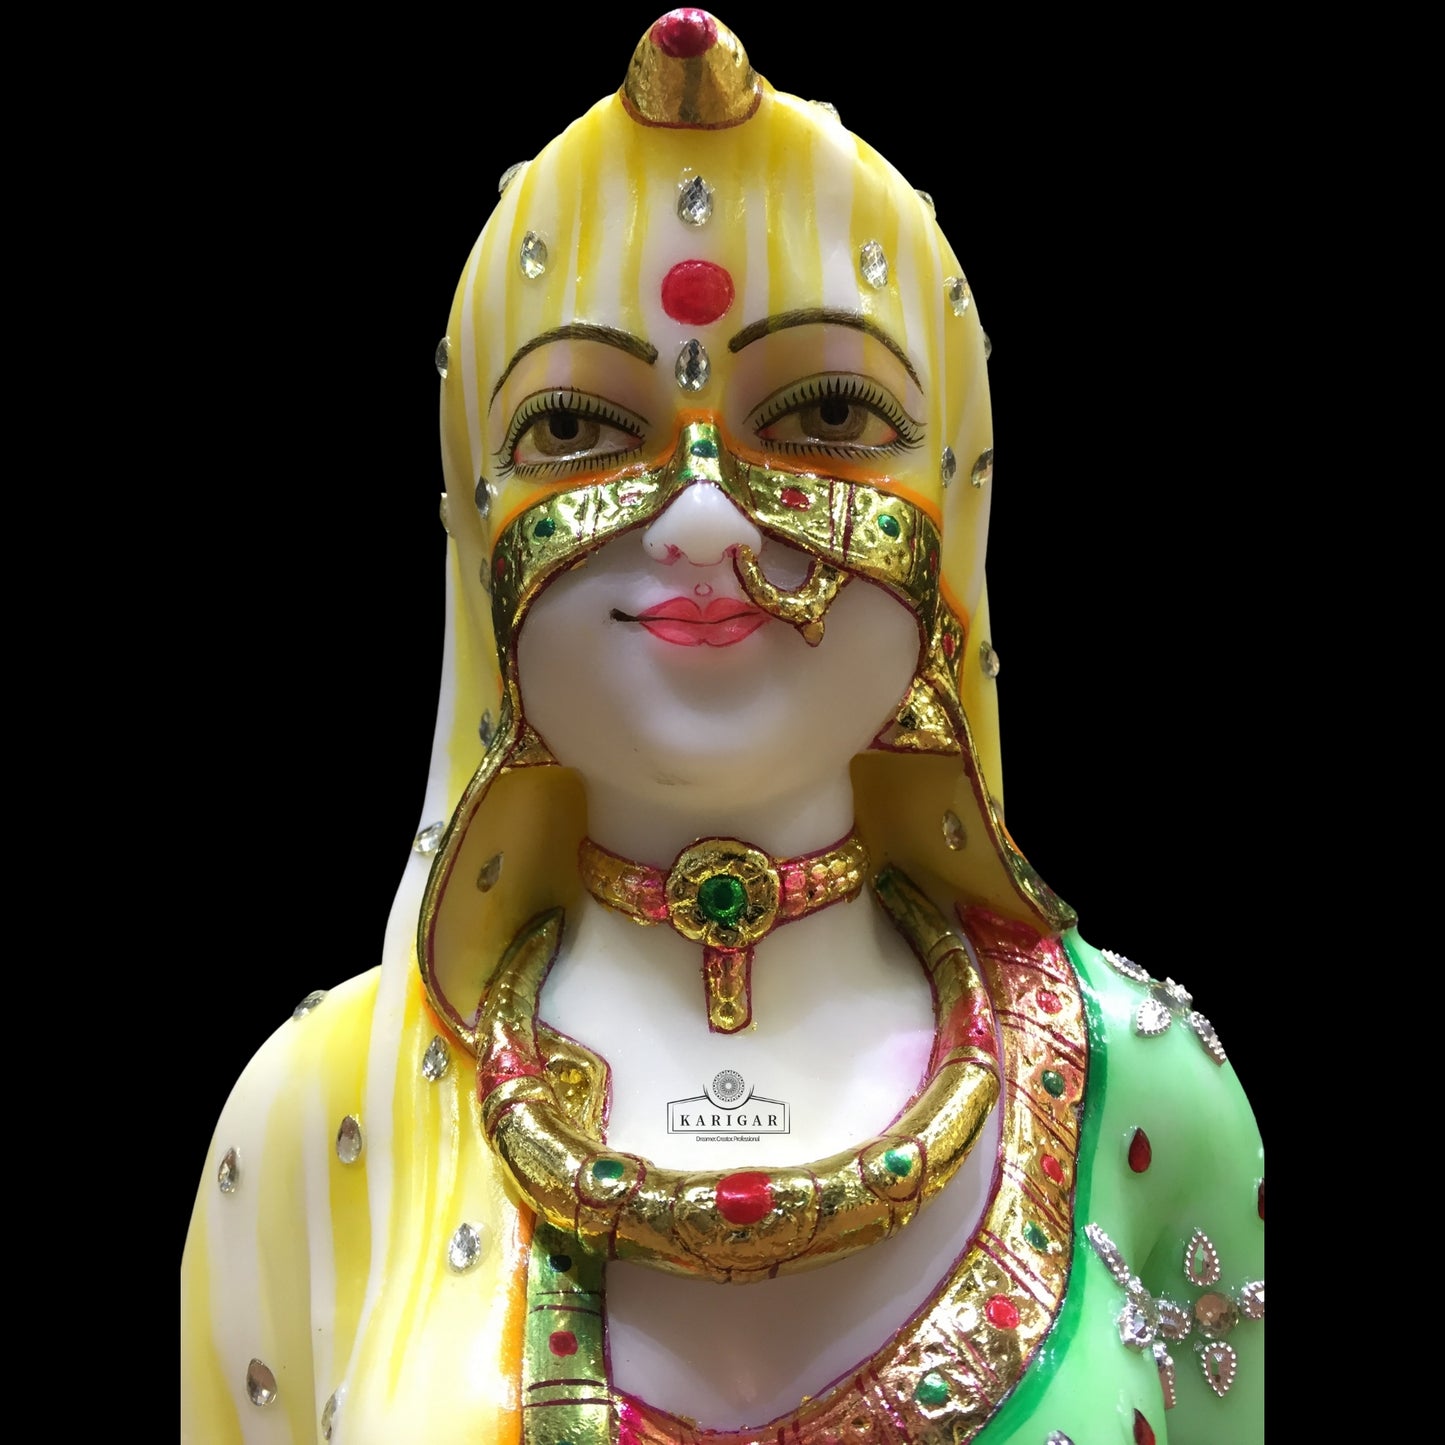 Bani Thani Bust Statue, Large 9 inches Murti, The Indian Mona Lisa Bust Marble Sculpture, Traditional Indian Women Figurine Bust, Multicolor Jewelry Clothes Figurine - Home Office Decor Gifts (Green)